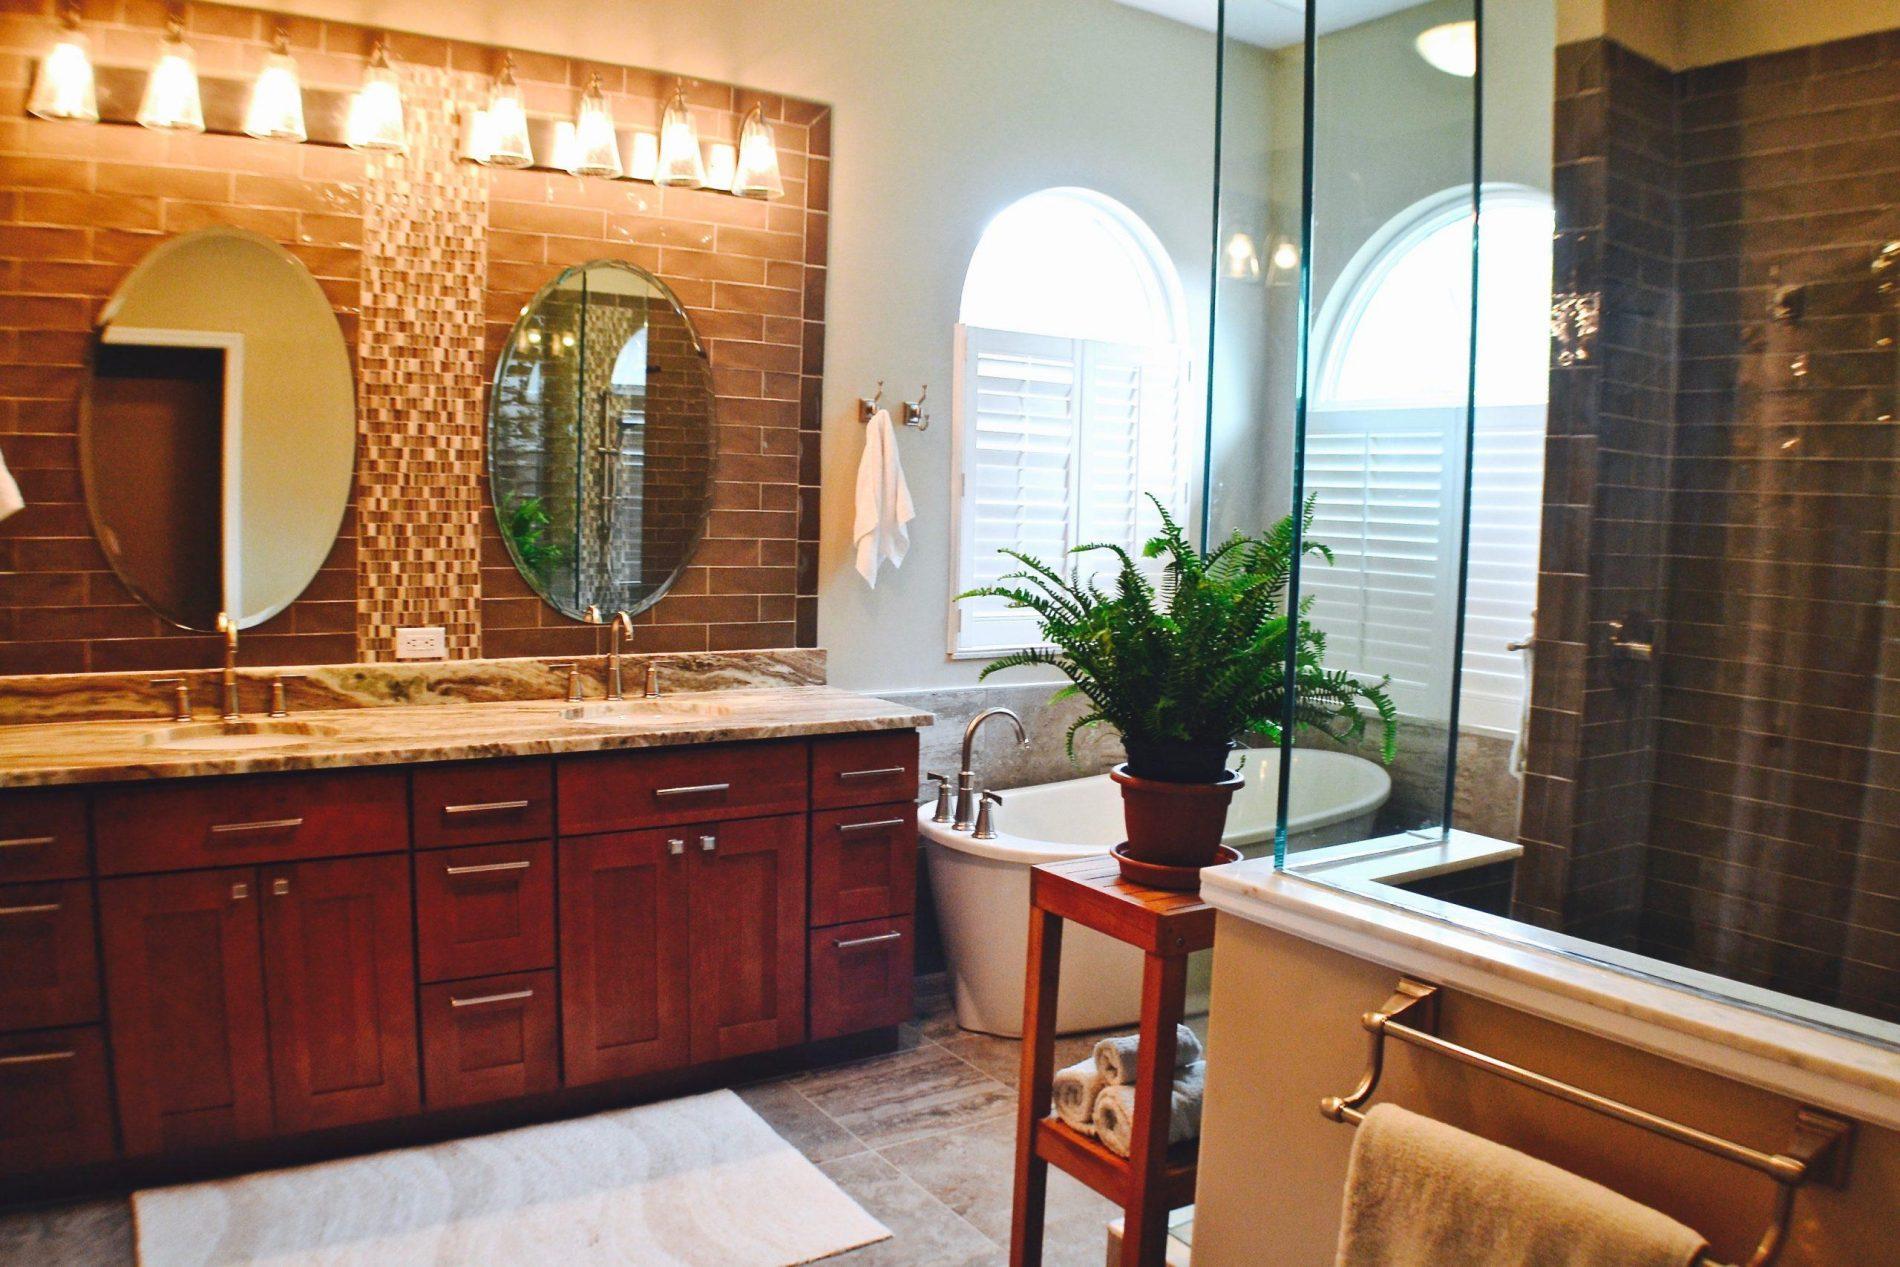 Chads Home Remodeling Service In Estero, Naples FL